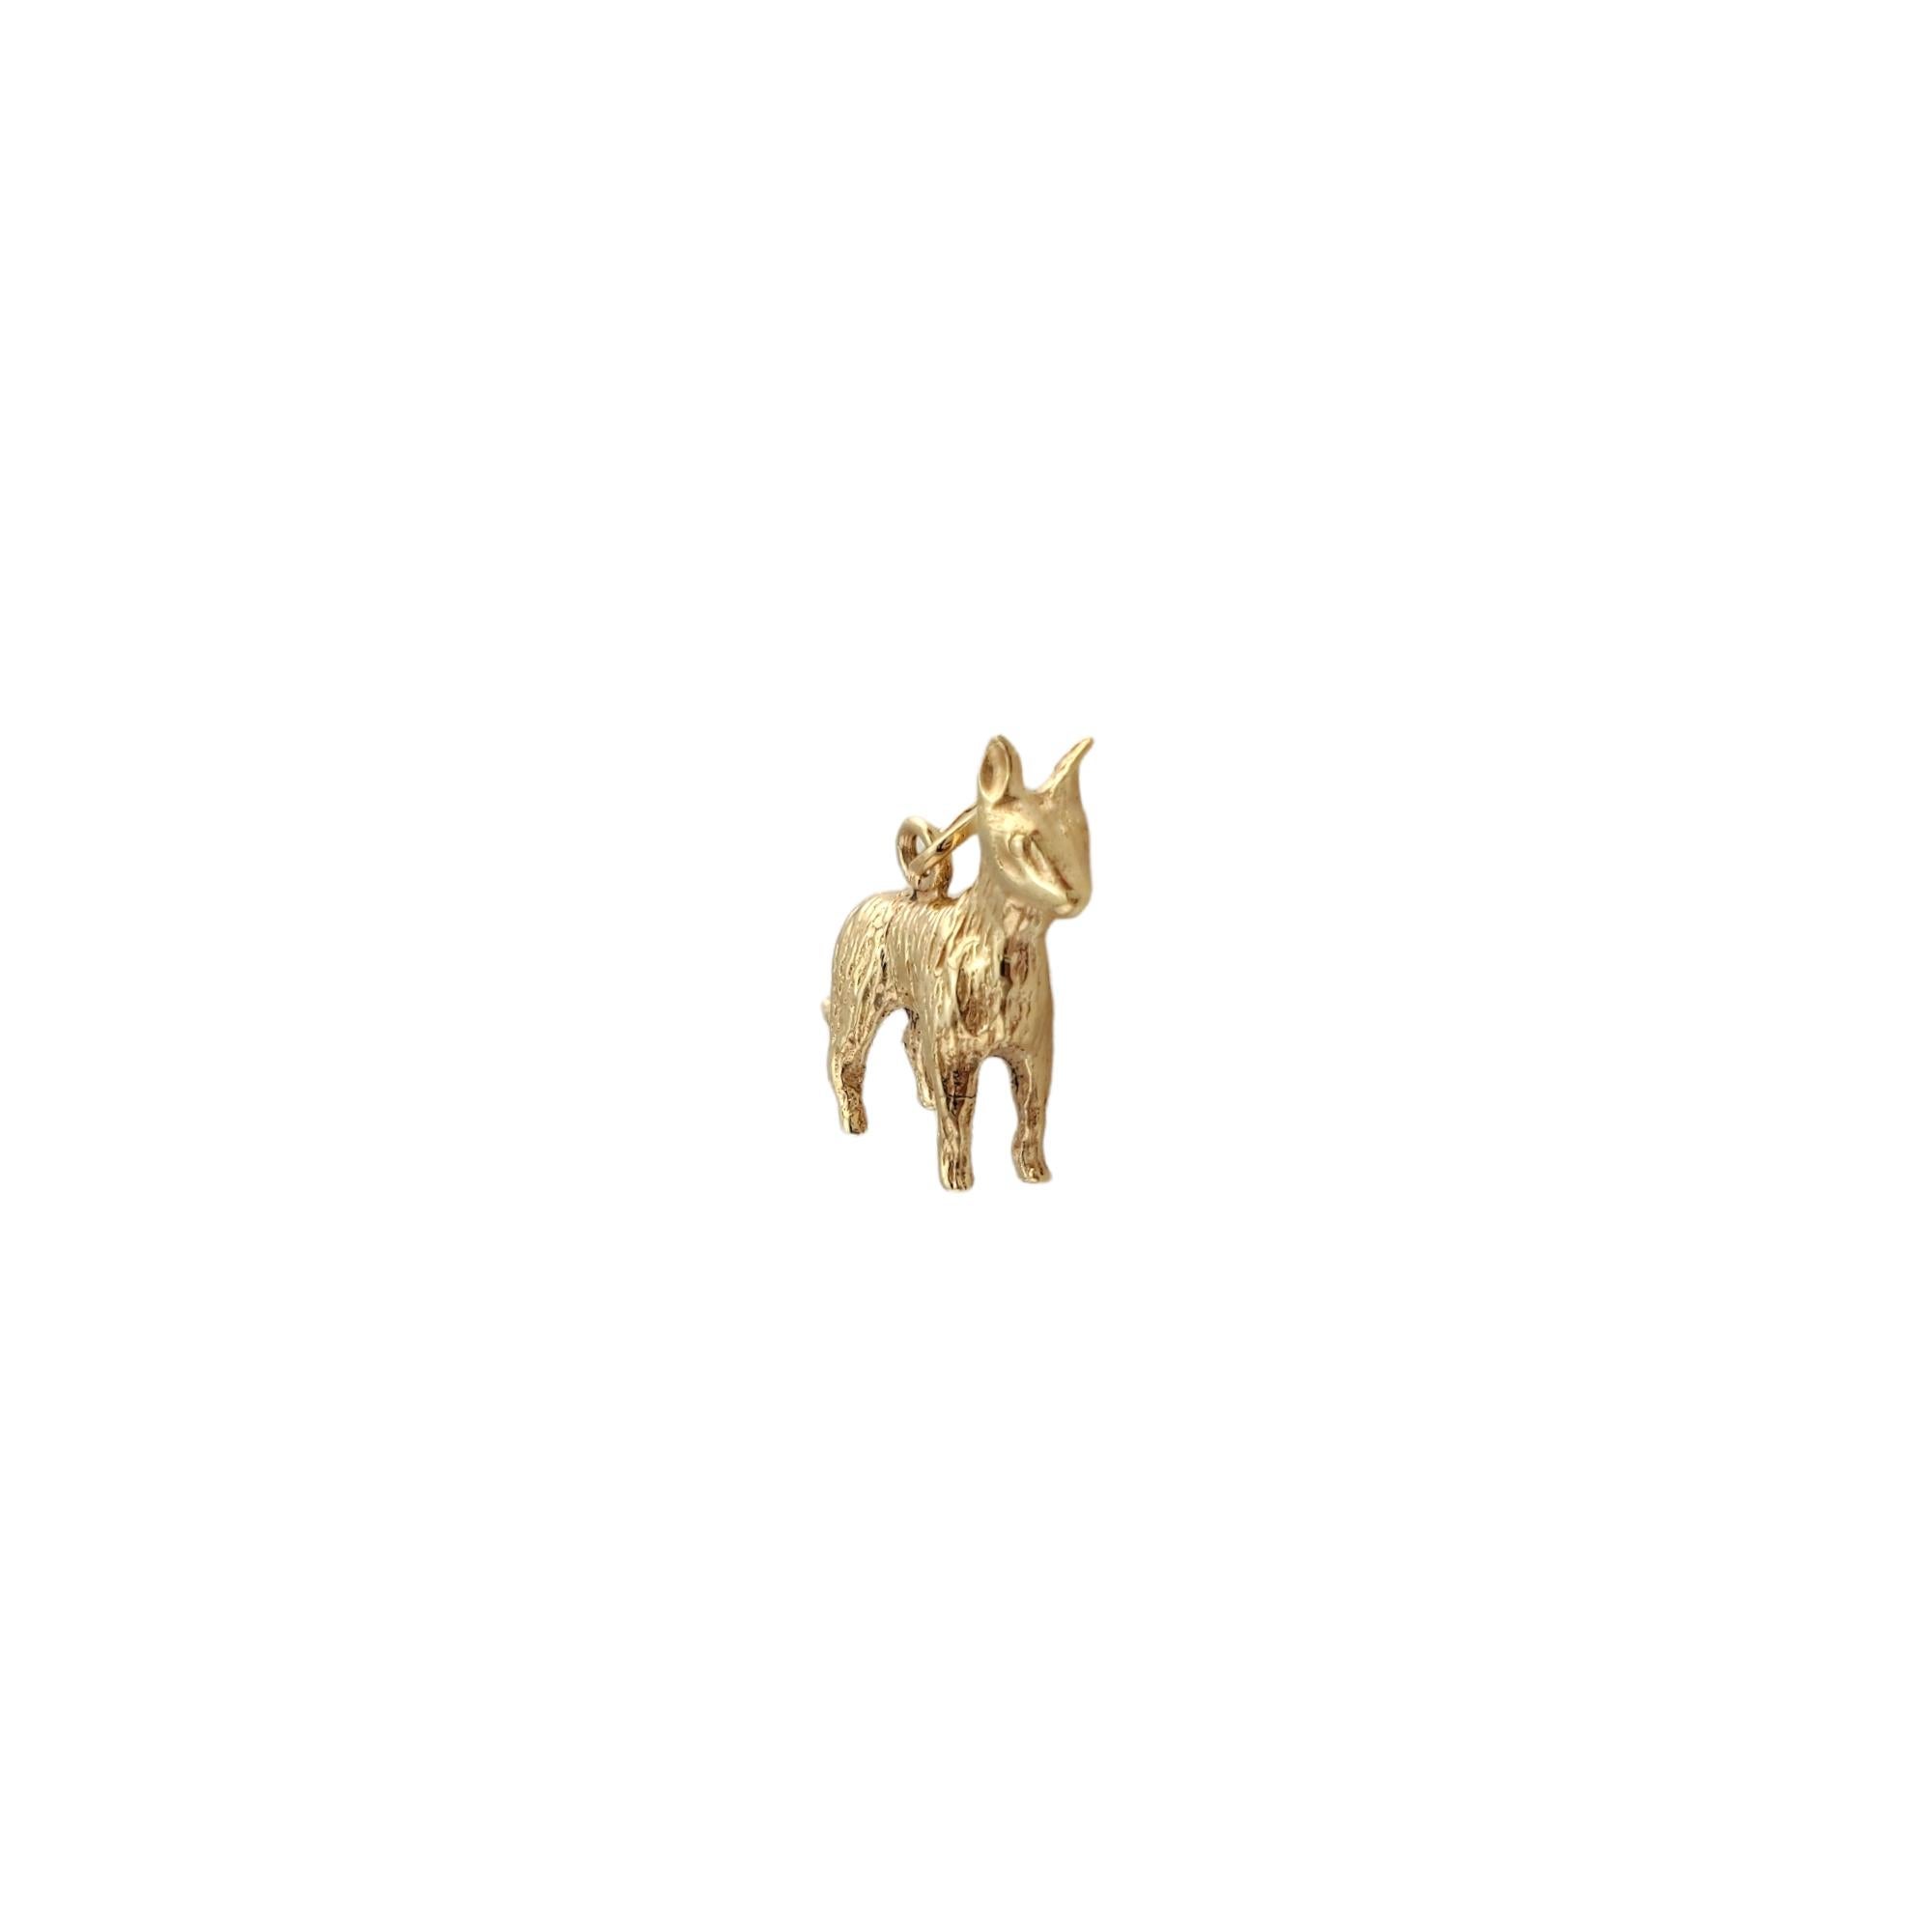 14K Yellow Gold Dog Charm 

This yellow gold dog charm is paws-itively cute! 

Size: 22.49mm X 20.95mm

Weight:  5.7gr / 3.6 dwt

Very good condition, professionally polished.

Will come packaged in a gift box and will be shipped U.S. Priority Mail